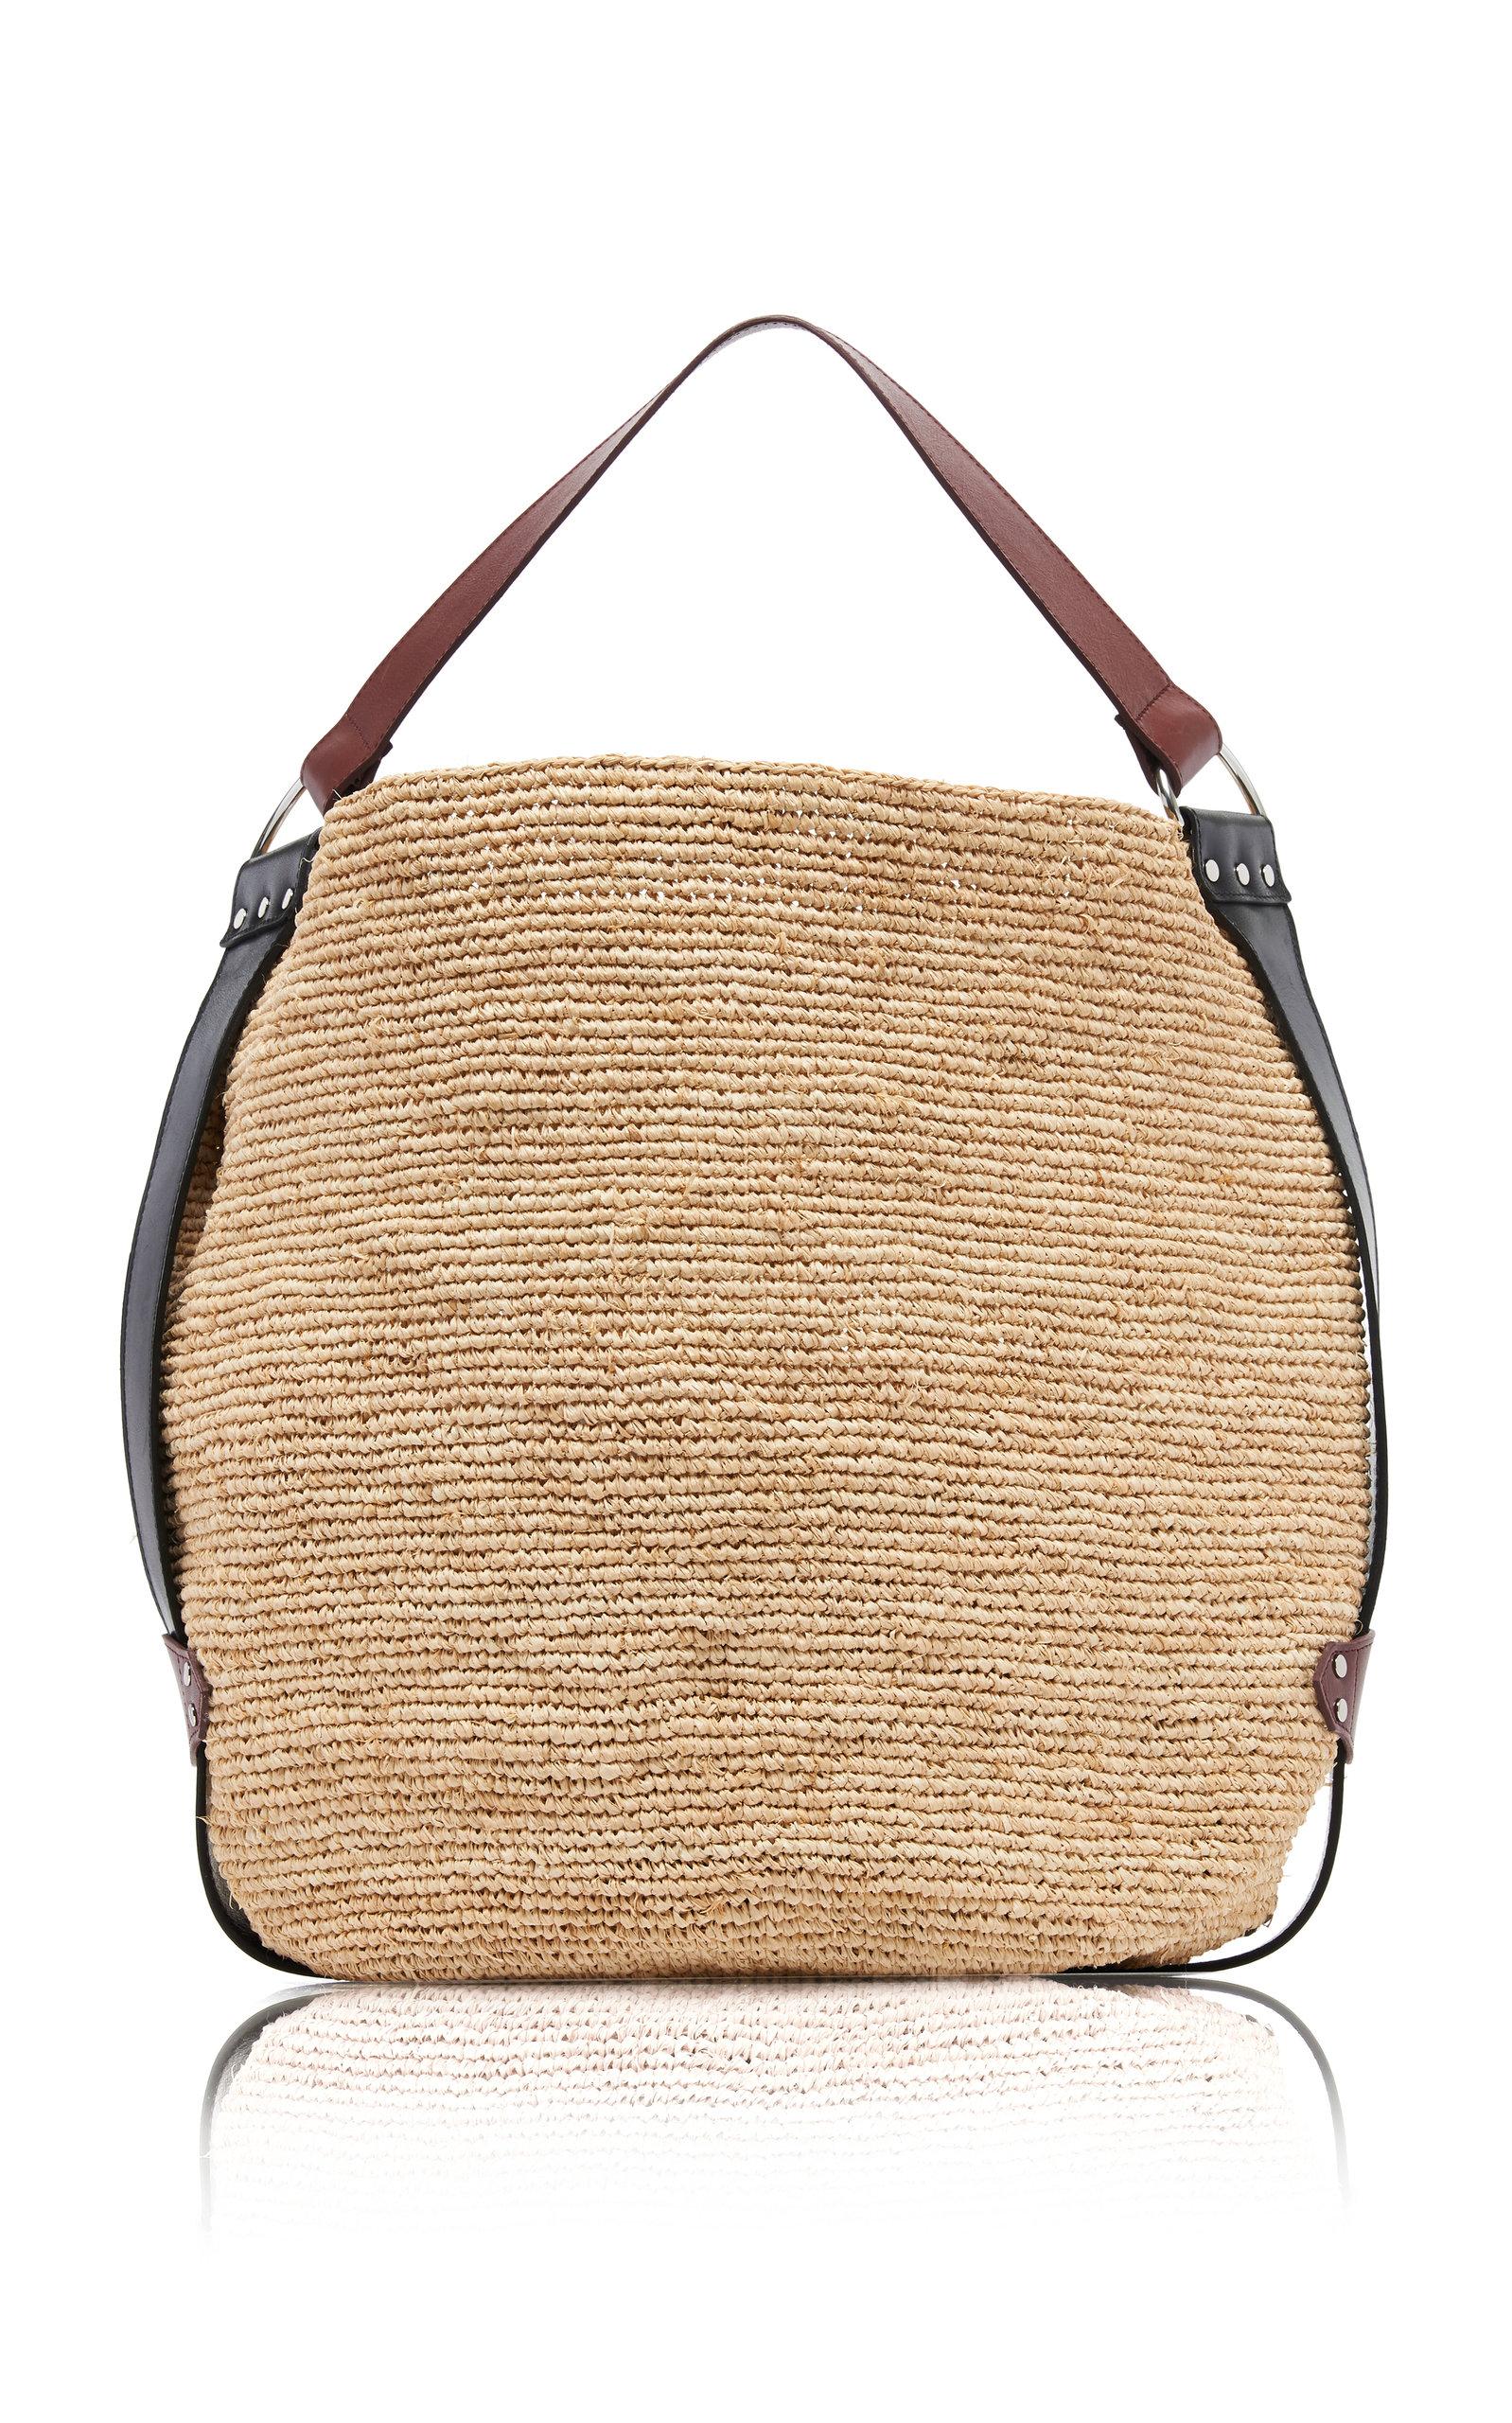 Isabel Marant Bayia Leather-trimmed Straw Bag in Natural | Lyst